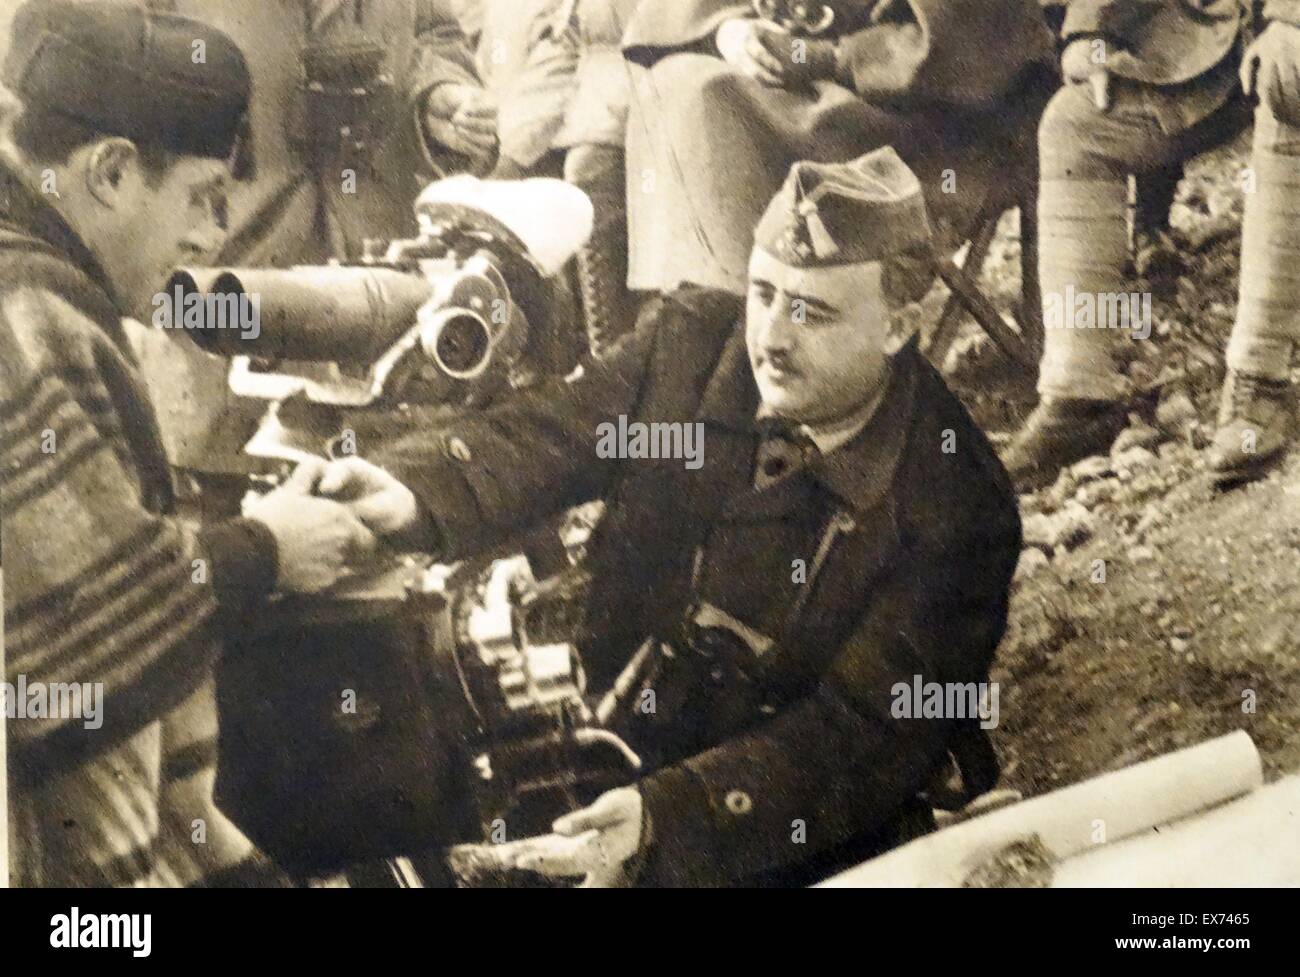 General Francisco Franco at the Battle of the Ebro was the longest and largest battle of the Spanish Civil War. It took place between July and November 1938, with fighting mainly concentrated in two areas on the lower course of the Ebro River Stock Photo